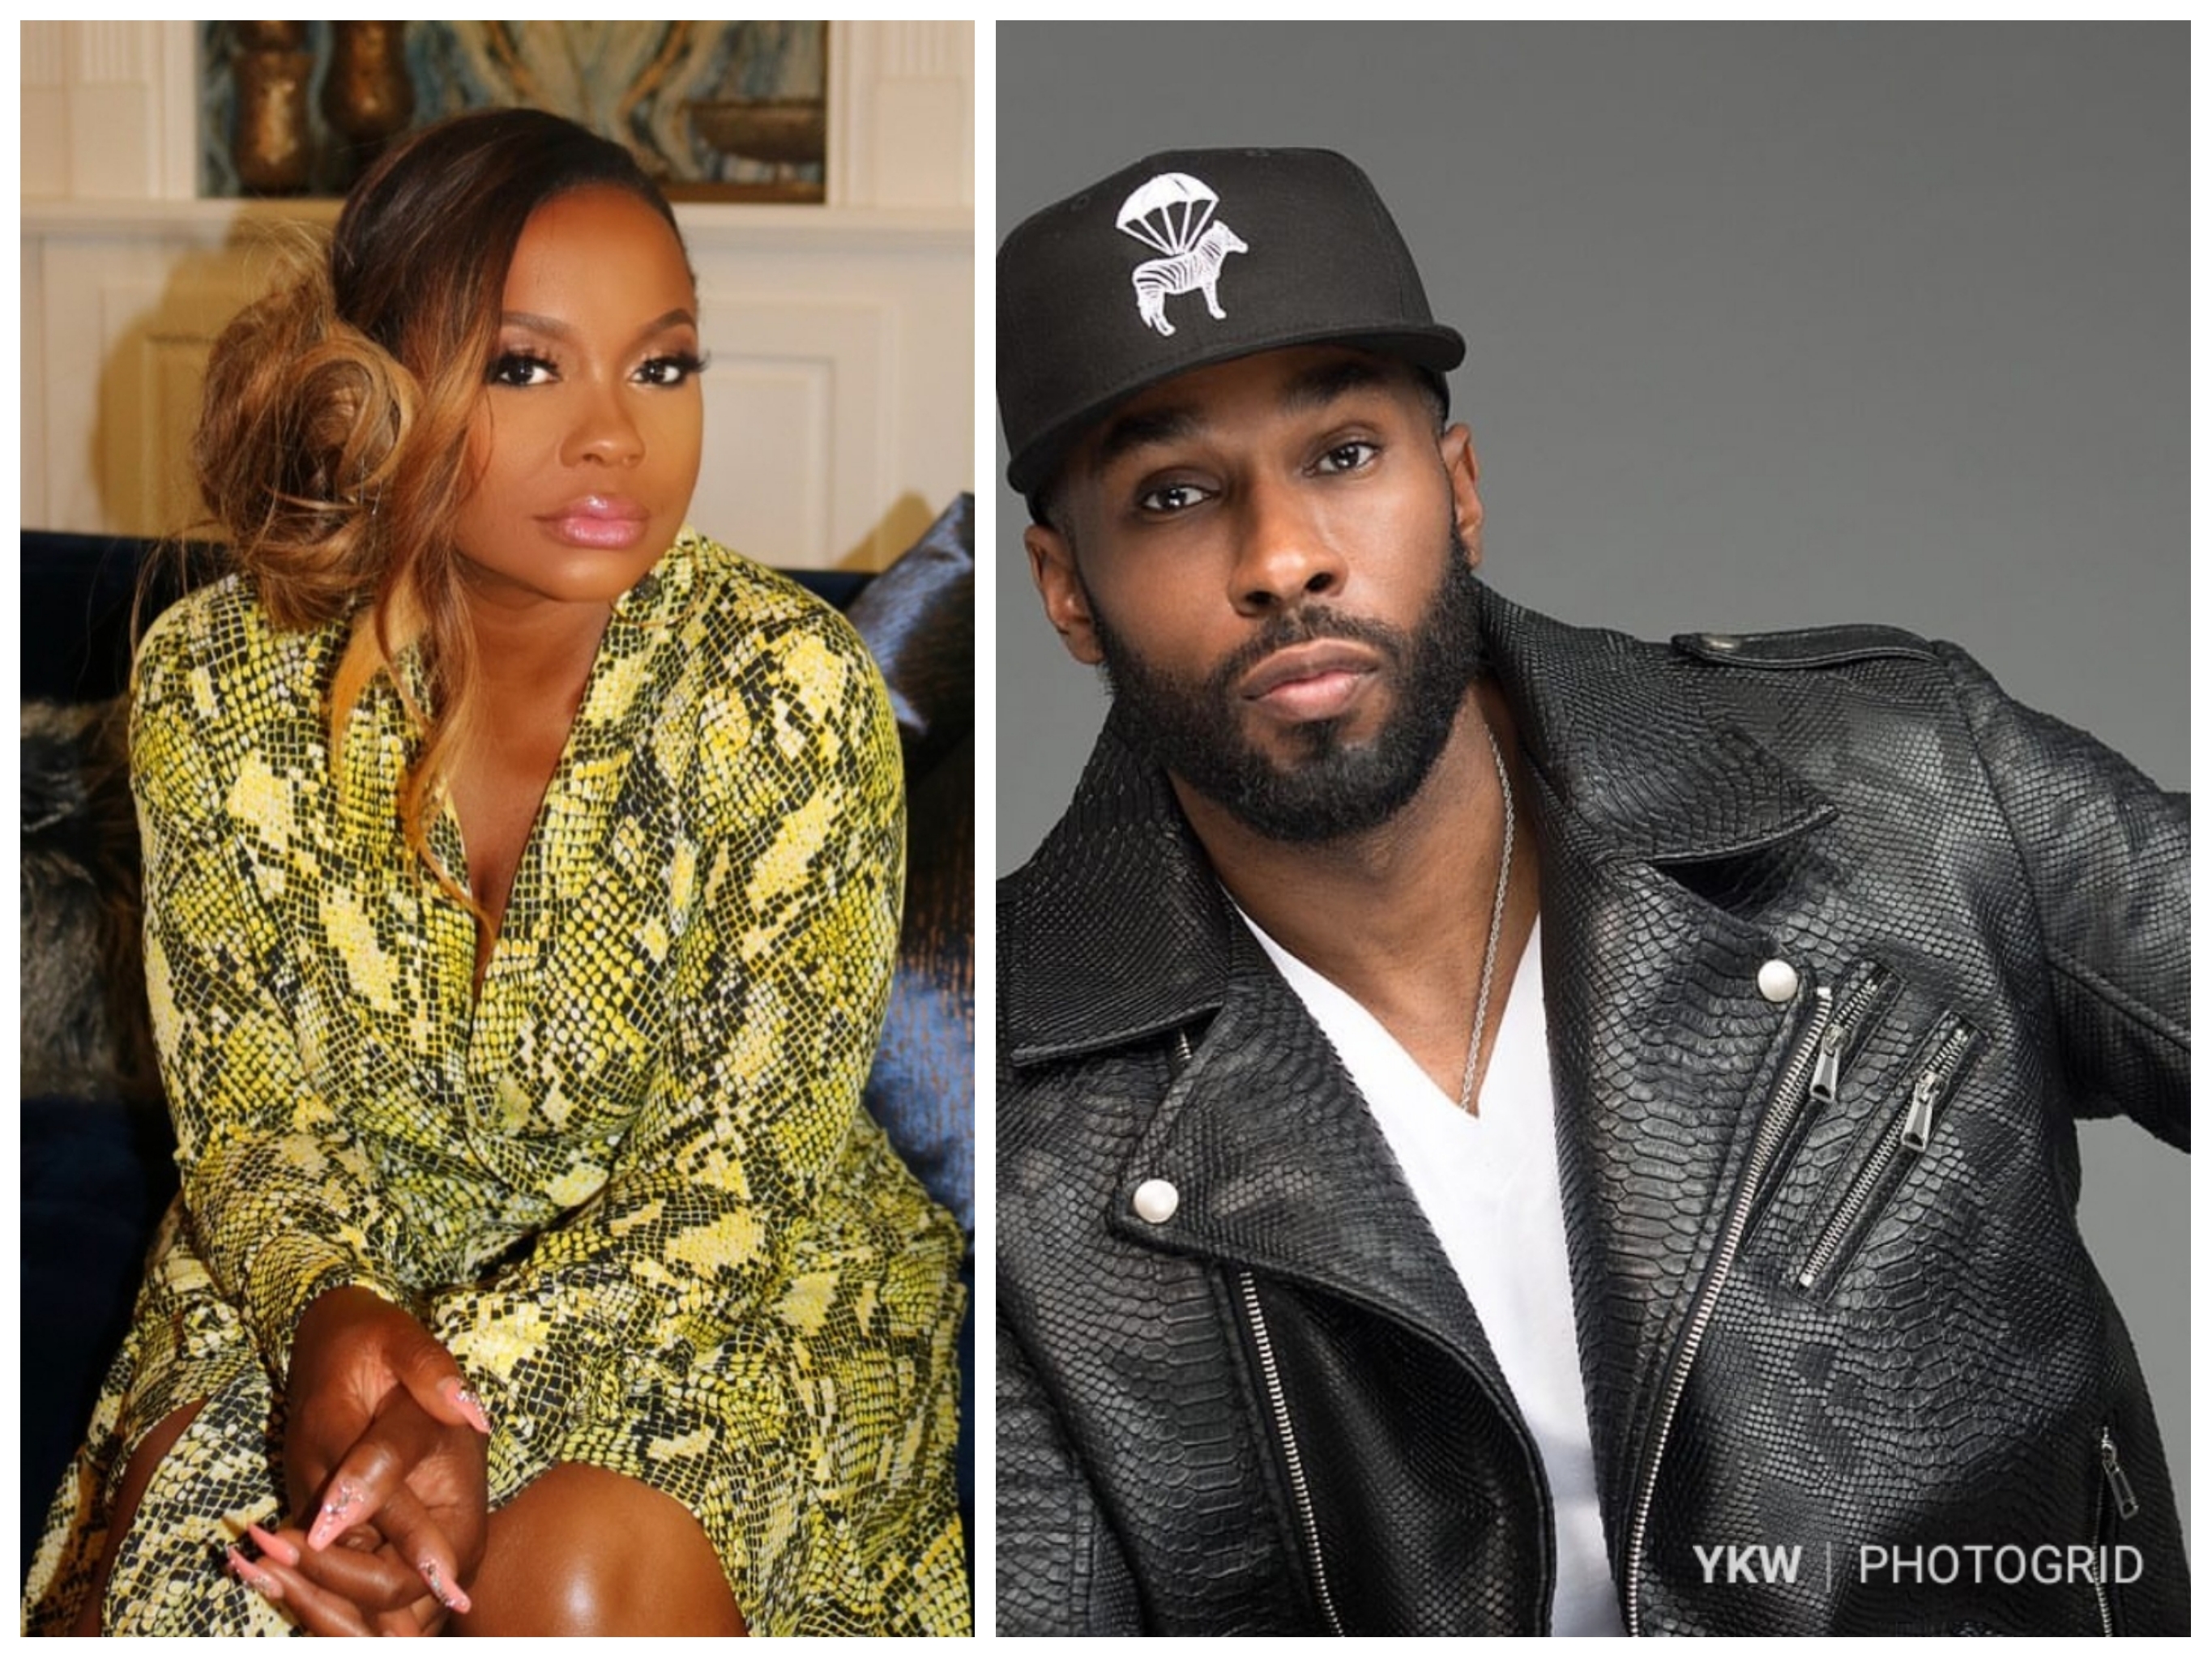 Phaedra Parks Cast On Marriage Boot Camp With New Boyfriend Actor Medina Islam